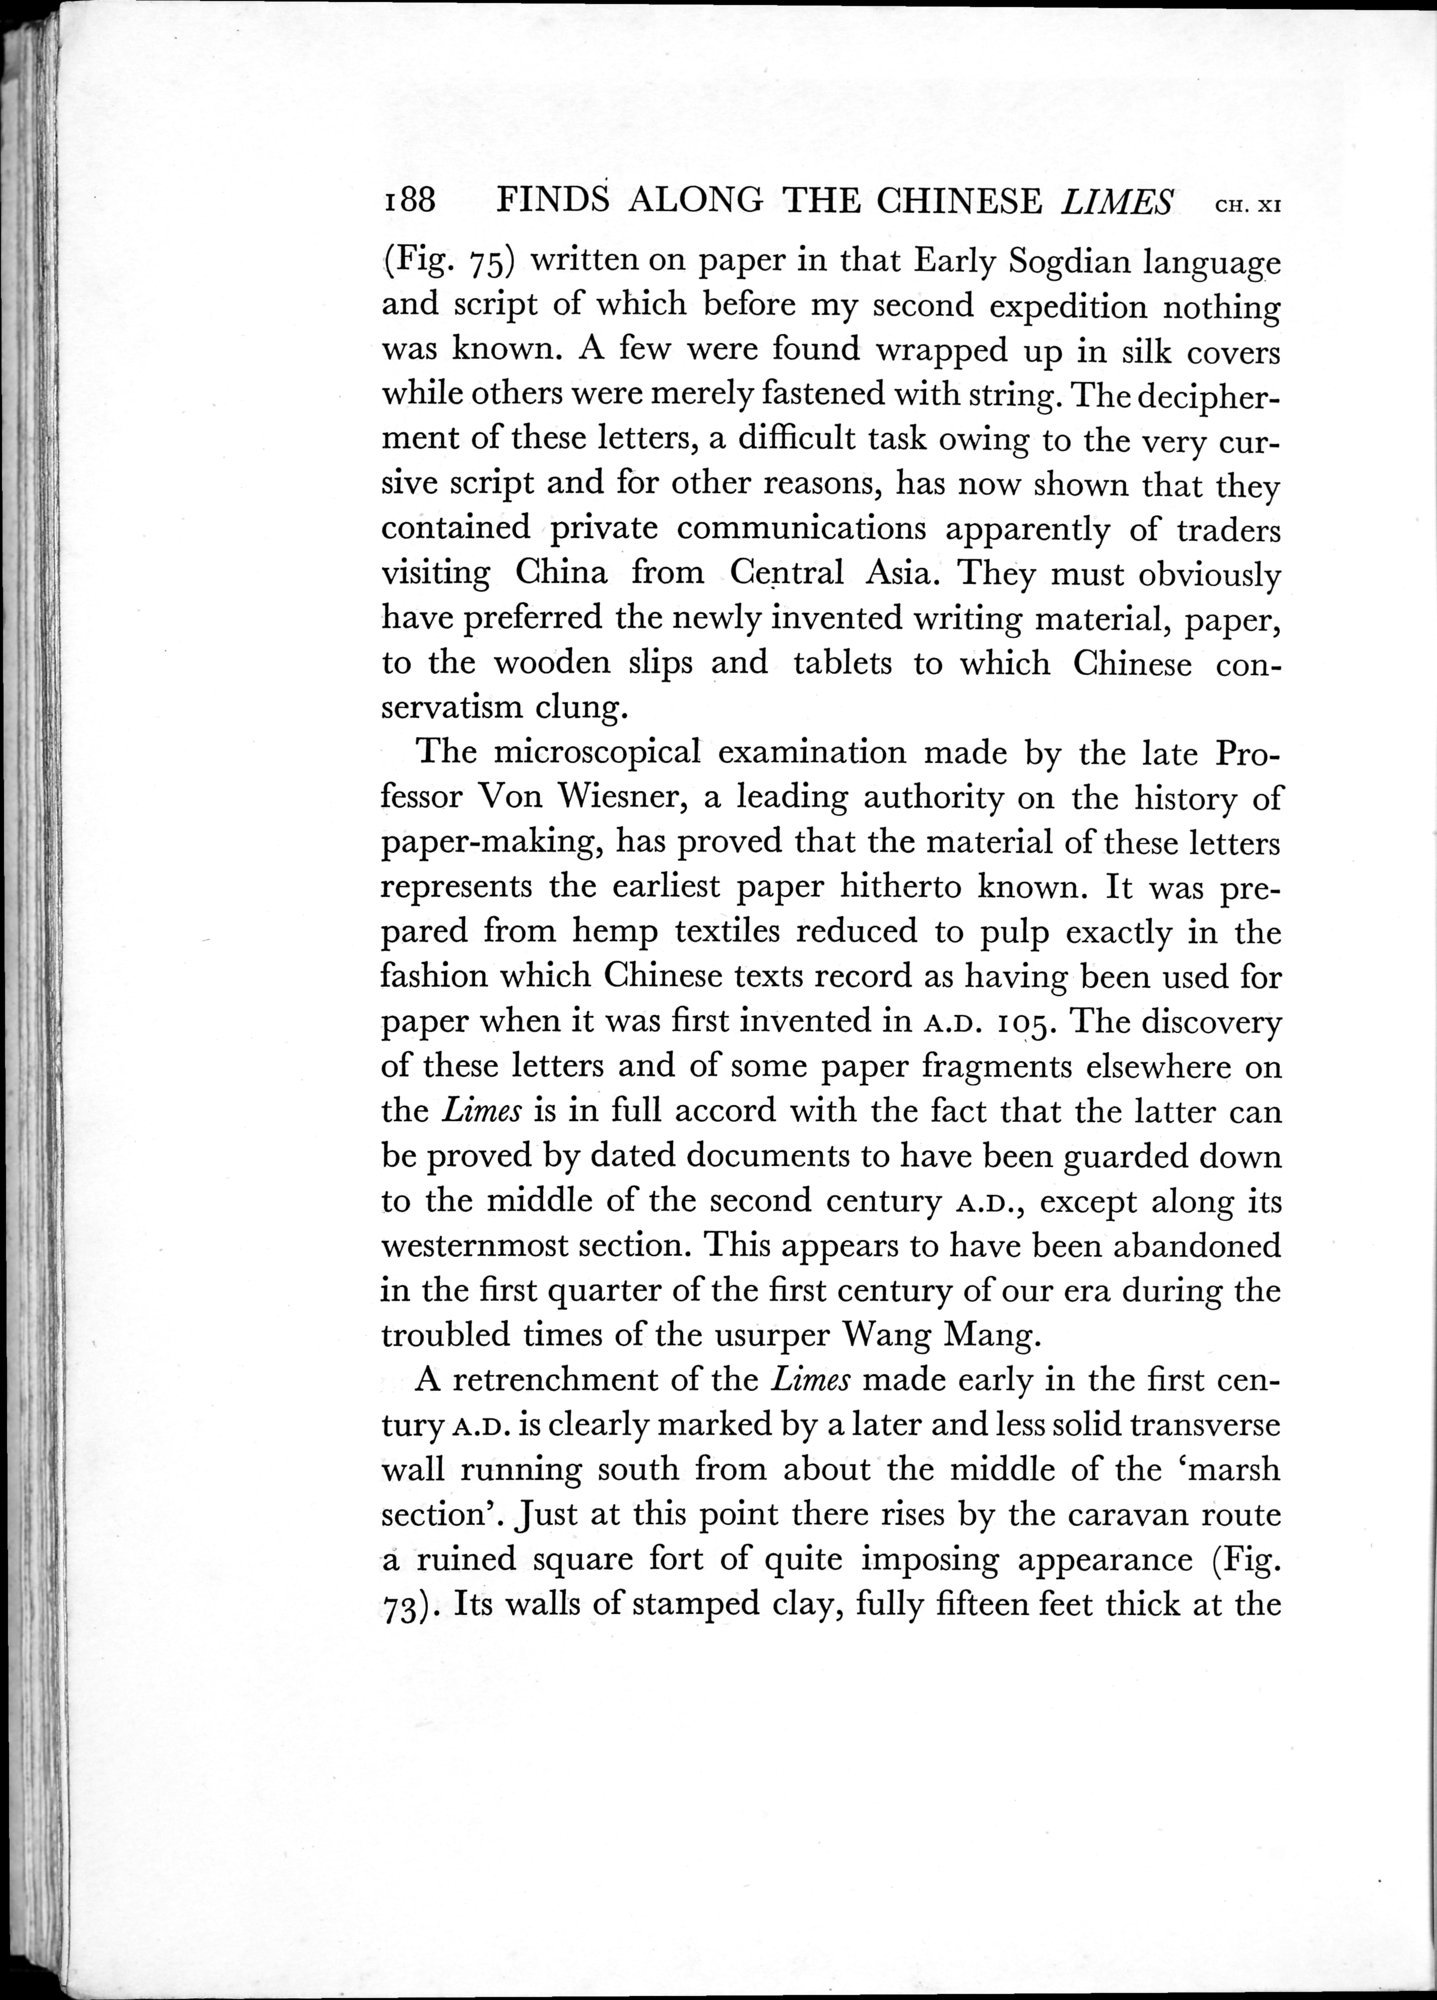 On Ancient Central-Asian Tracks : vol.1 / Page 312 (Grayscale High Resolution Image)